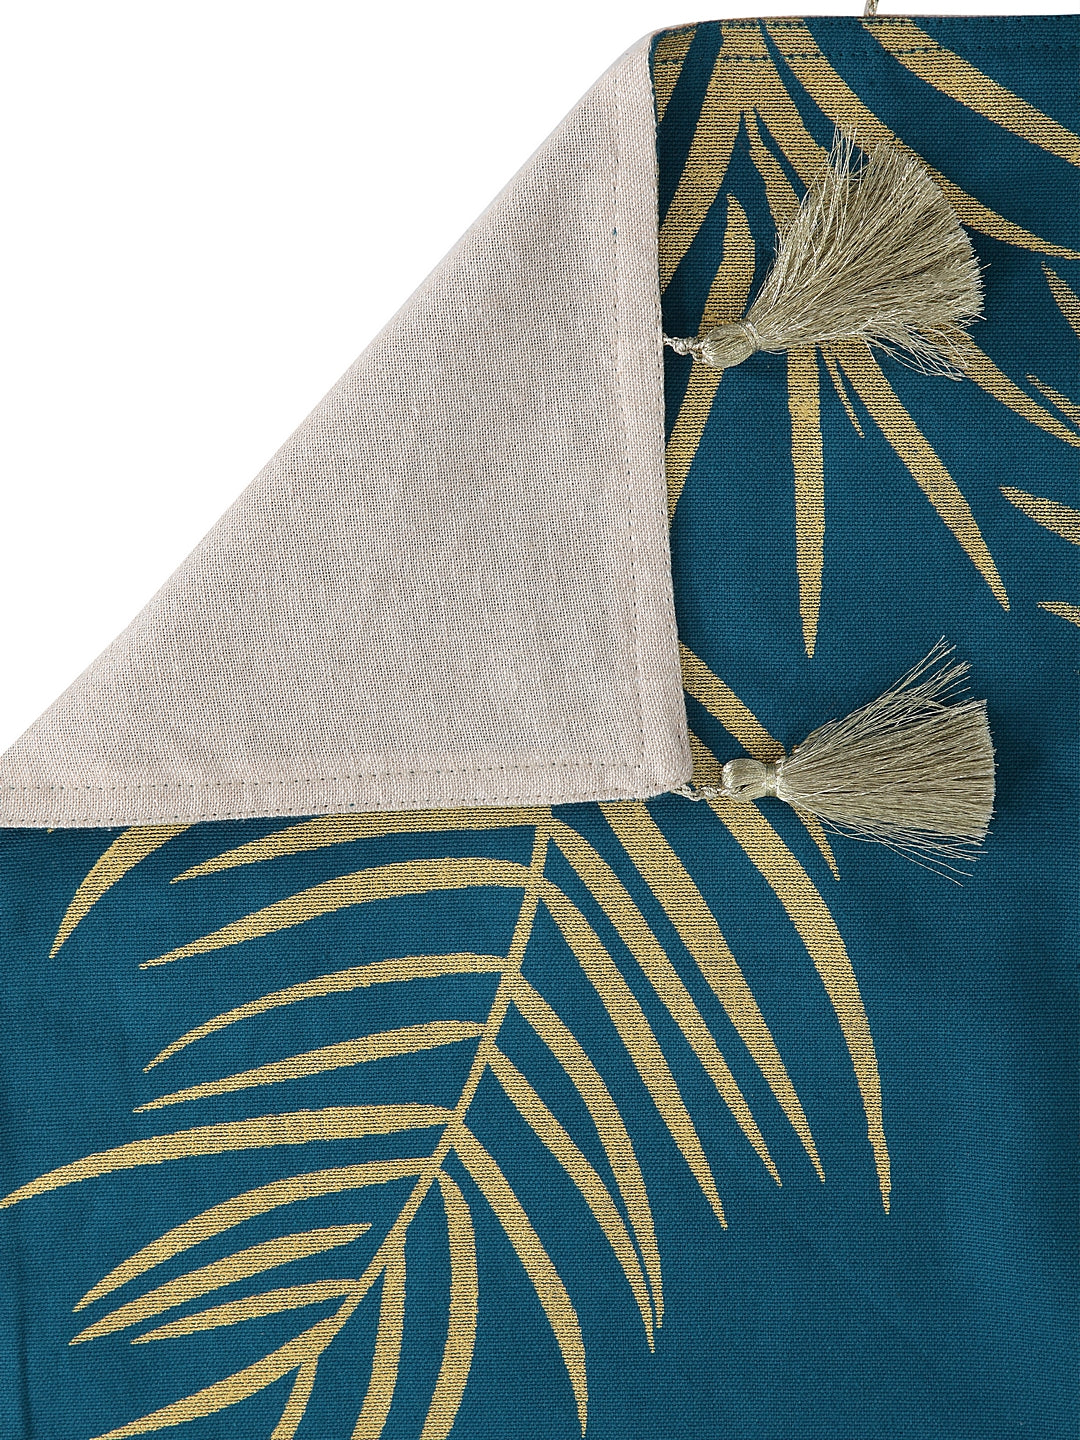 Gold Foil Palm Leaf Printed 4/6 Cotton Table Runner